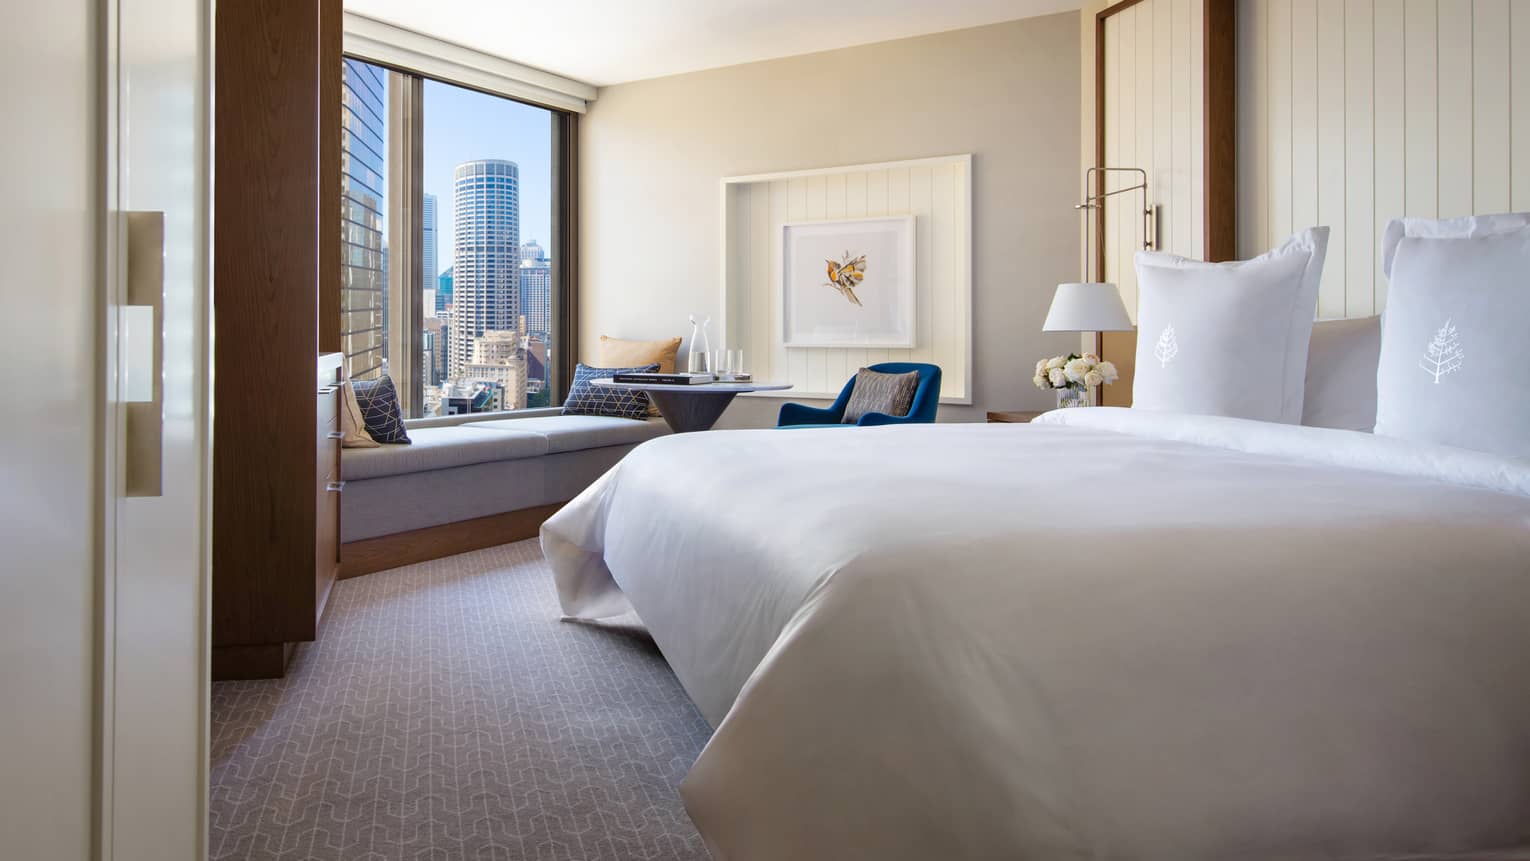 Hotel room with king bed and views of downtown Sydney